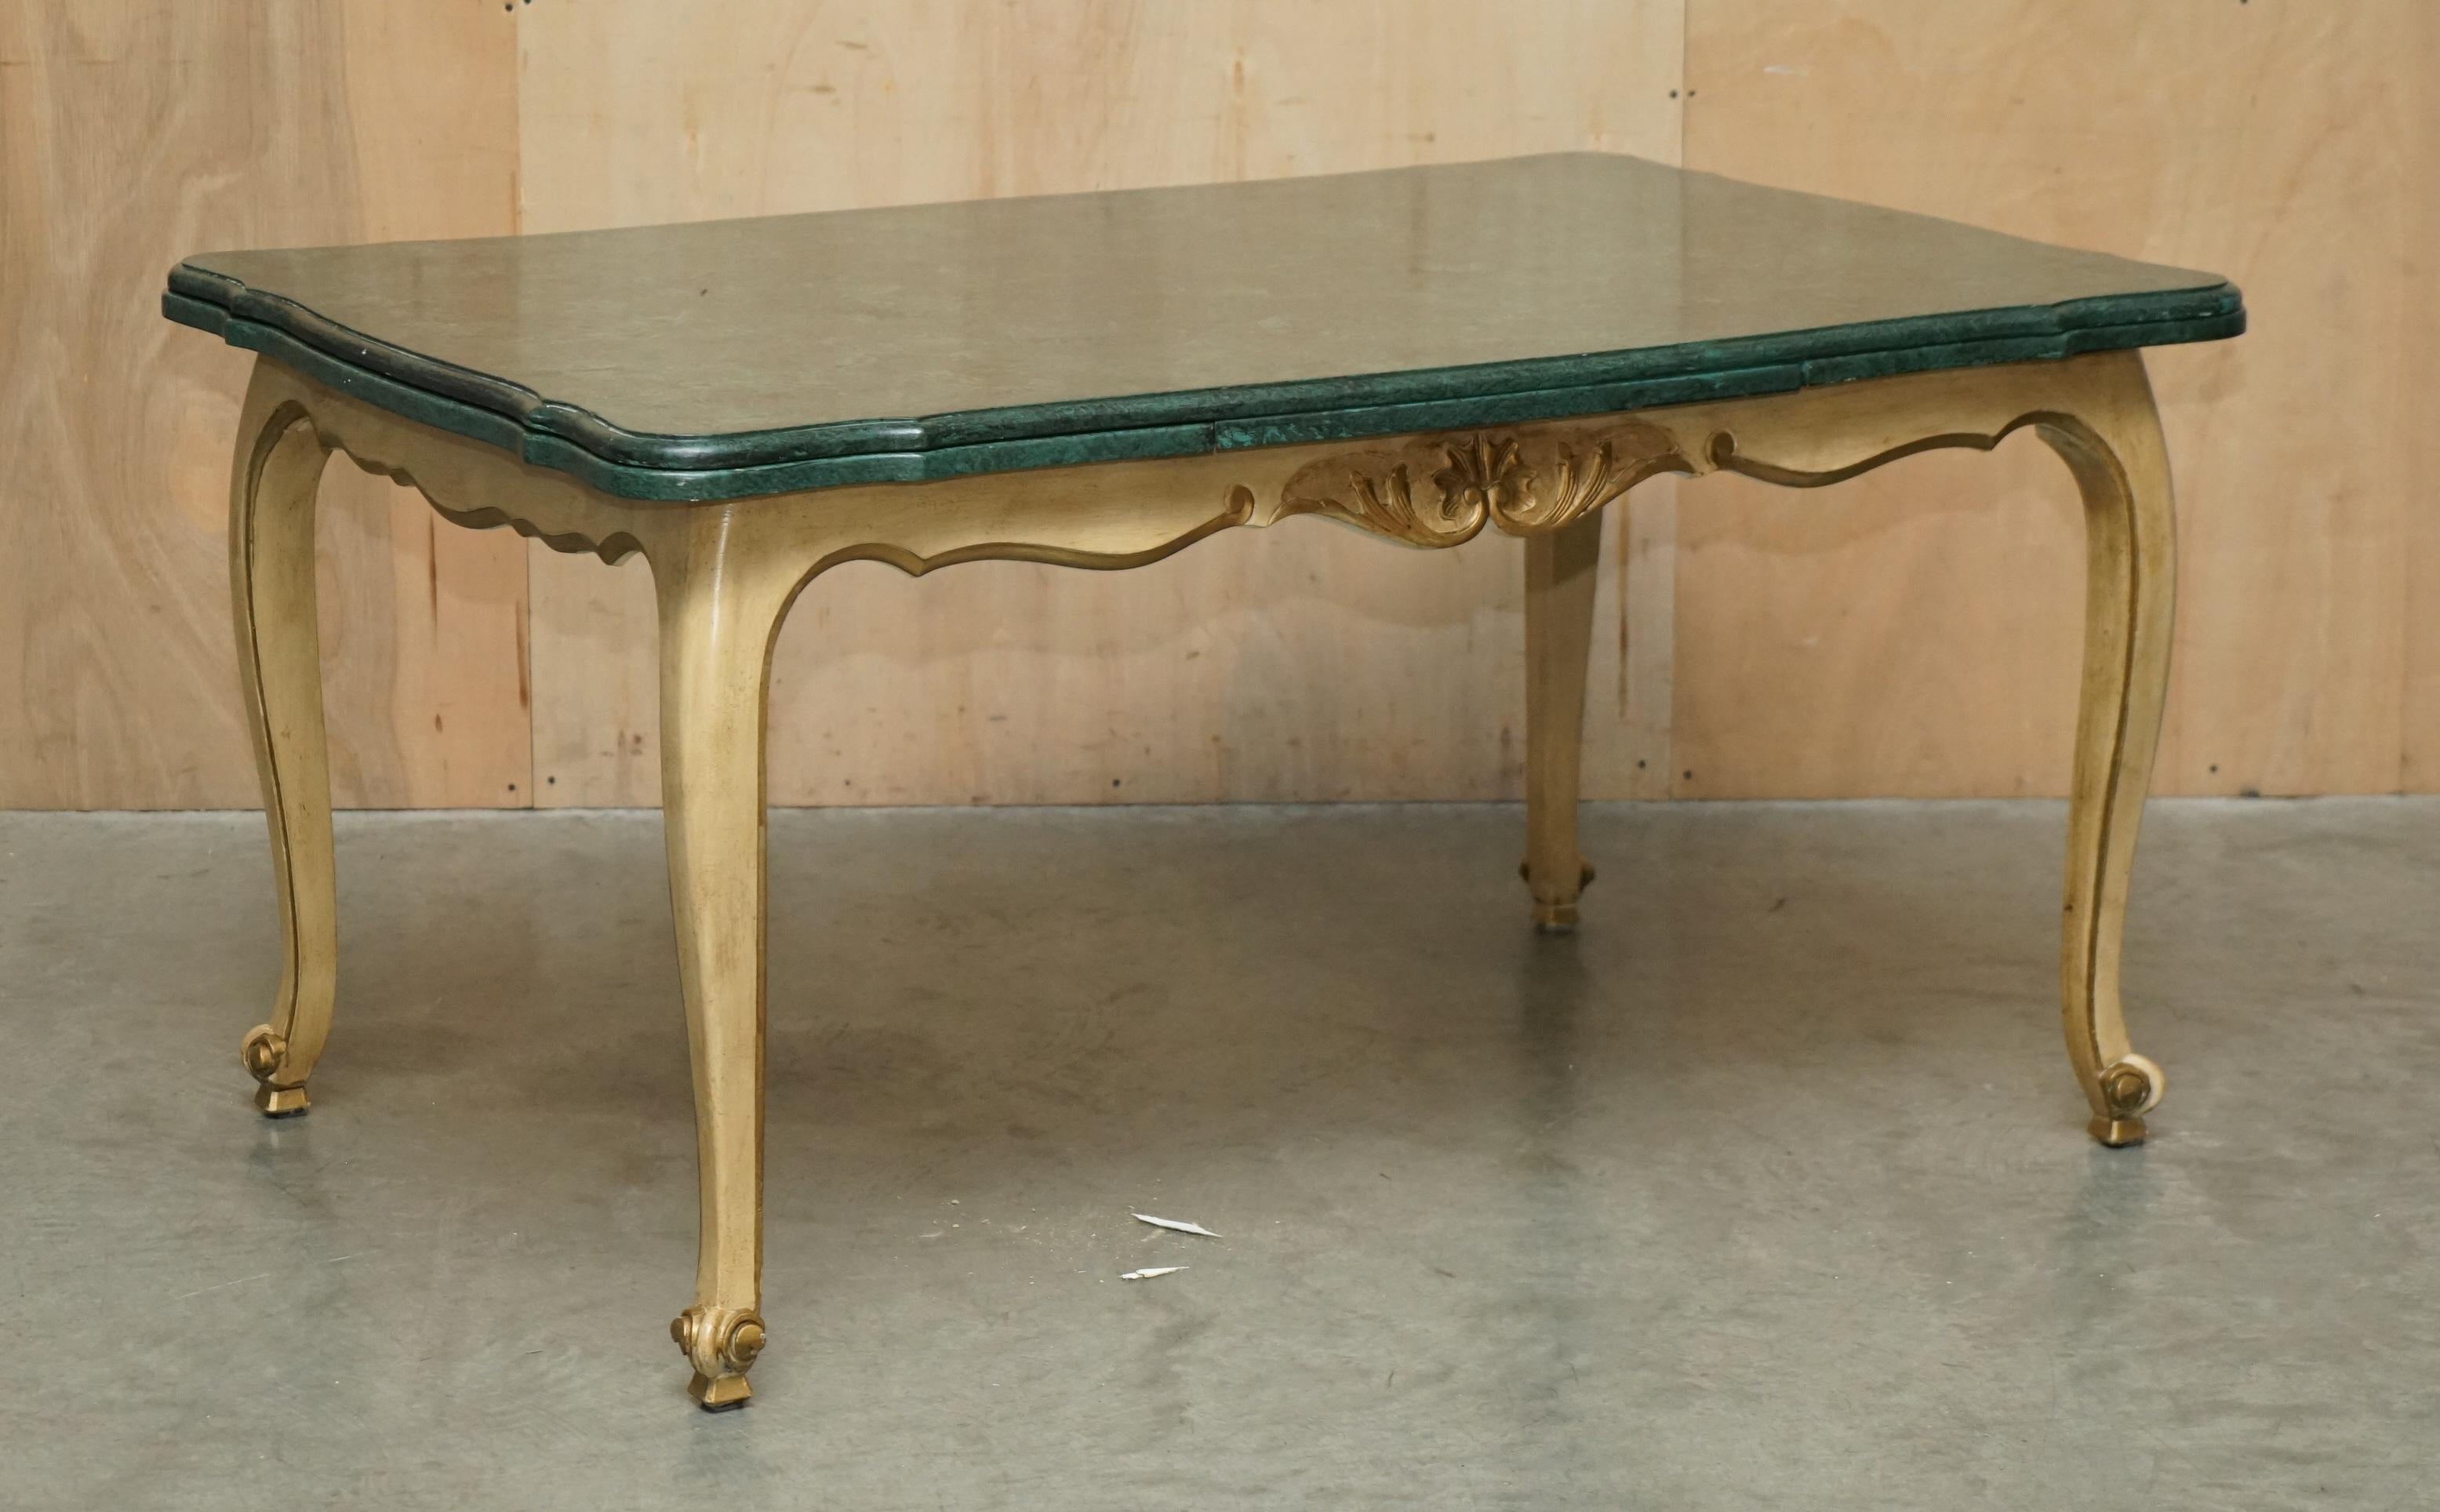 Royal House Antiques

Royal House Antiques is delighted to offer for sale this stunning circa 1870 French oak extending dining table with faux Malachite painted top

Please note the delivery fee listed is just a guide, it covers within the M25 only